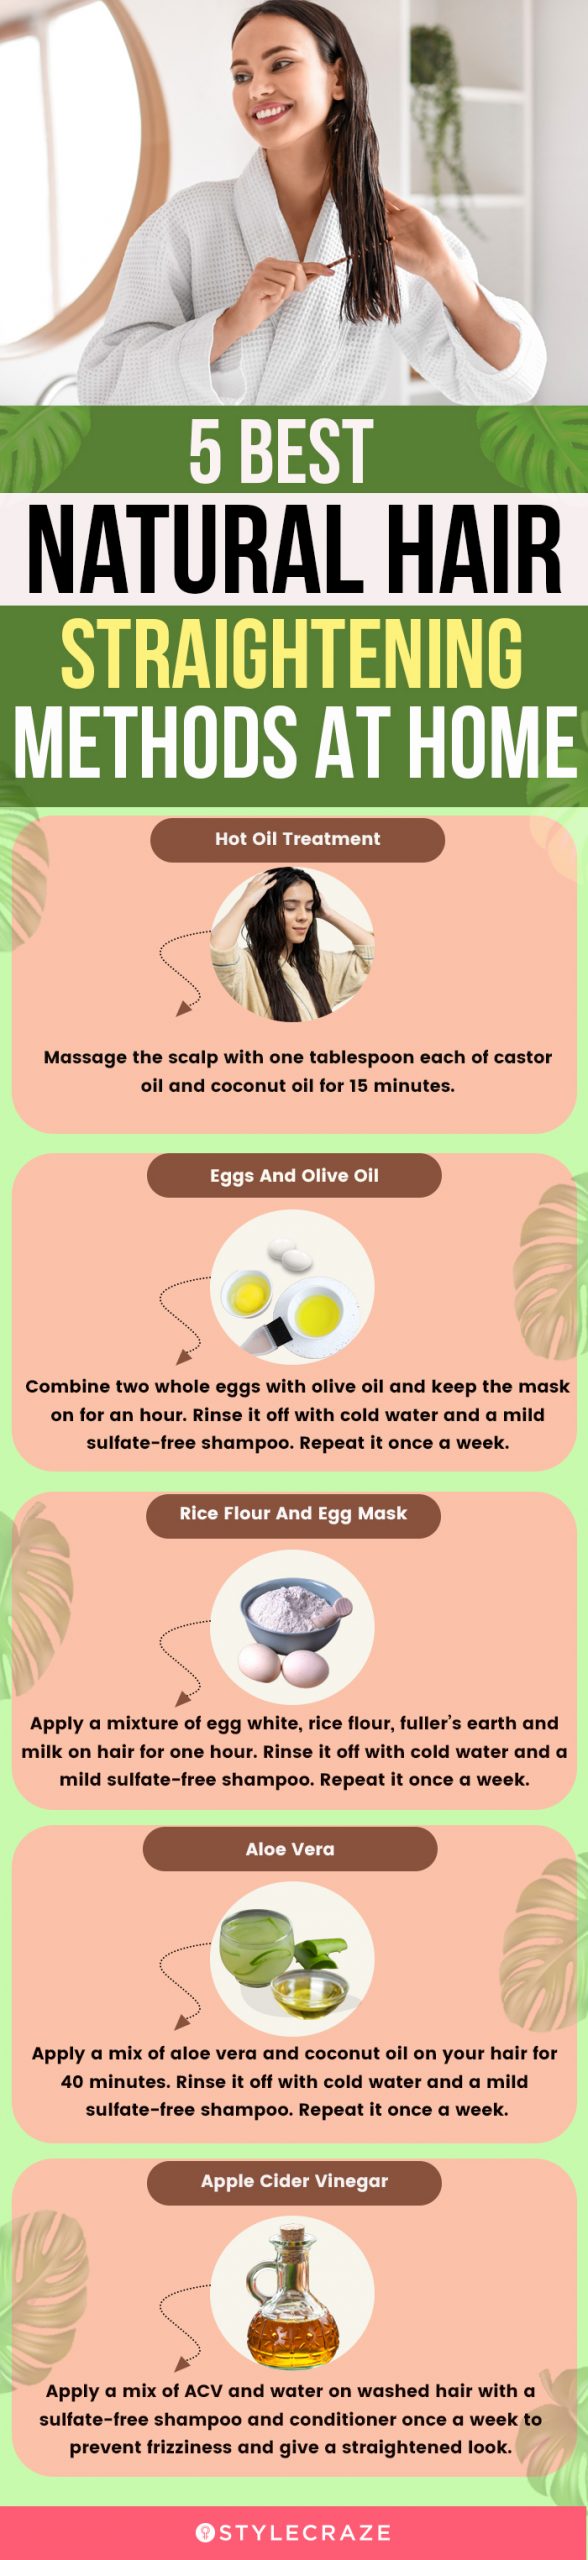 5 best natural hair straightening methods at home [infographic]